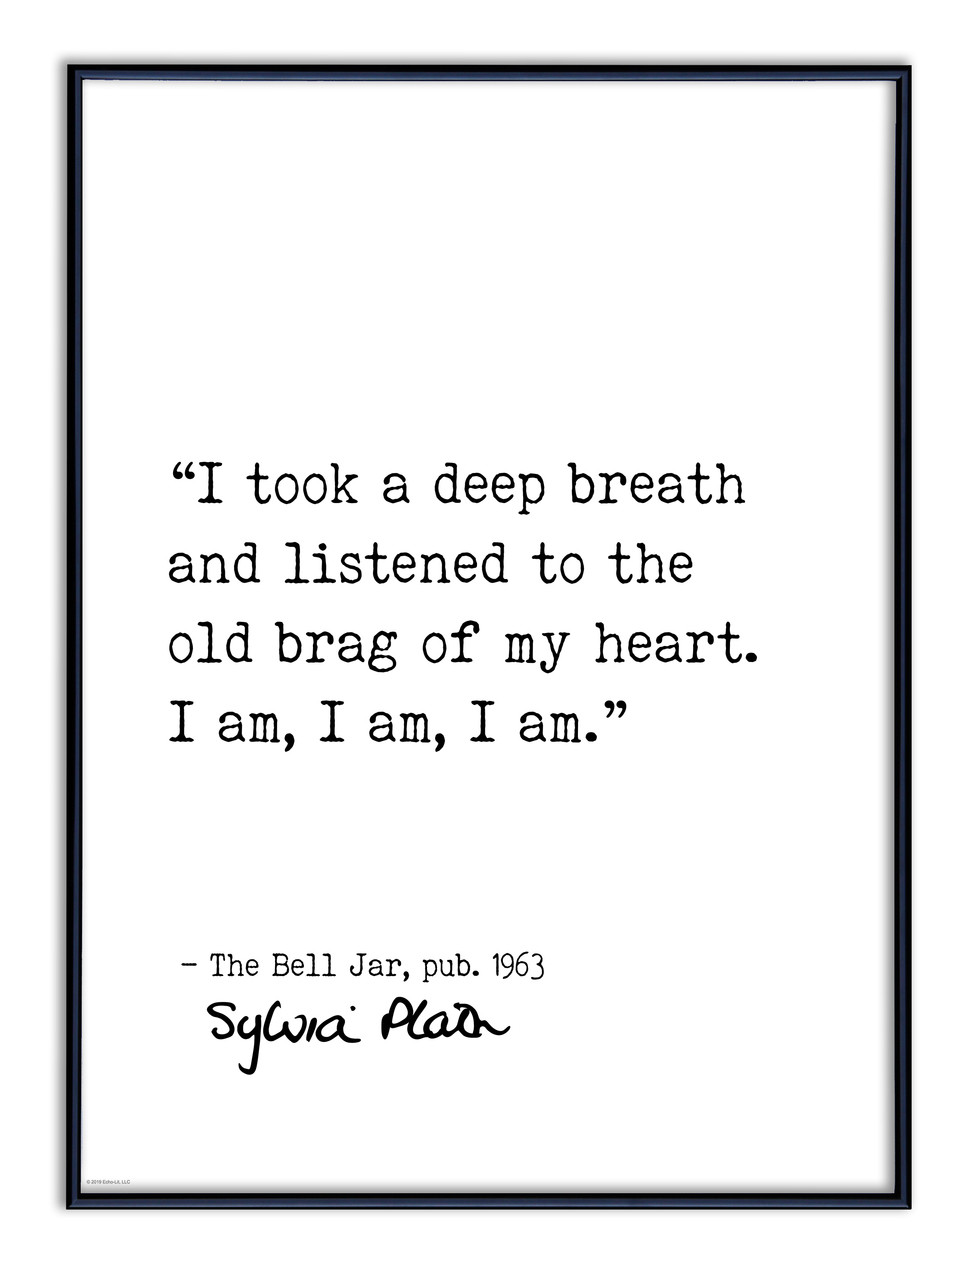 the bell jar - sylvia plath  Favorite book quotes, Romantic book